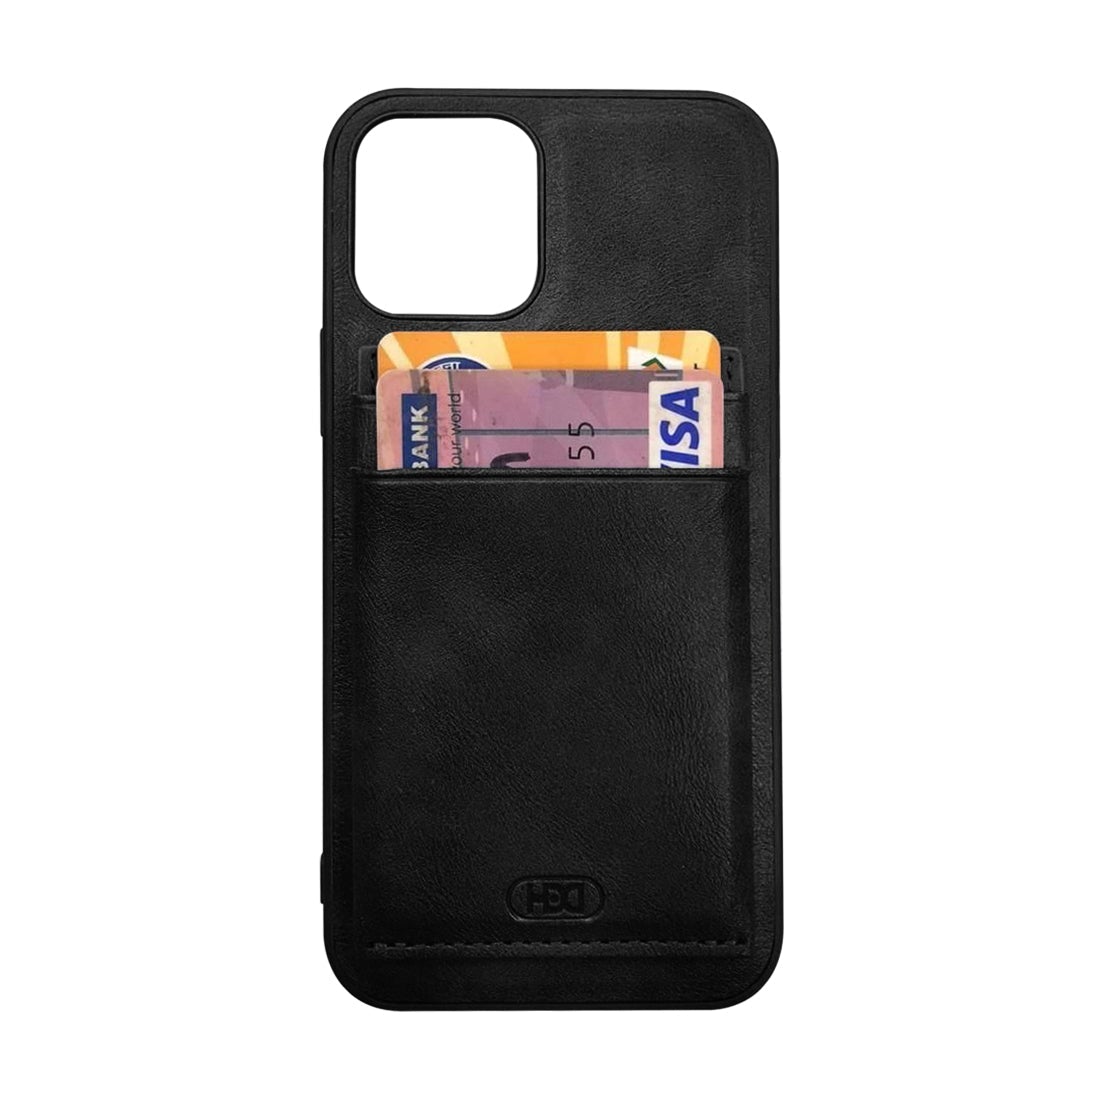 HBD Leather Wallet Case for iPhone - Black